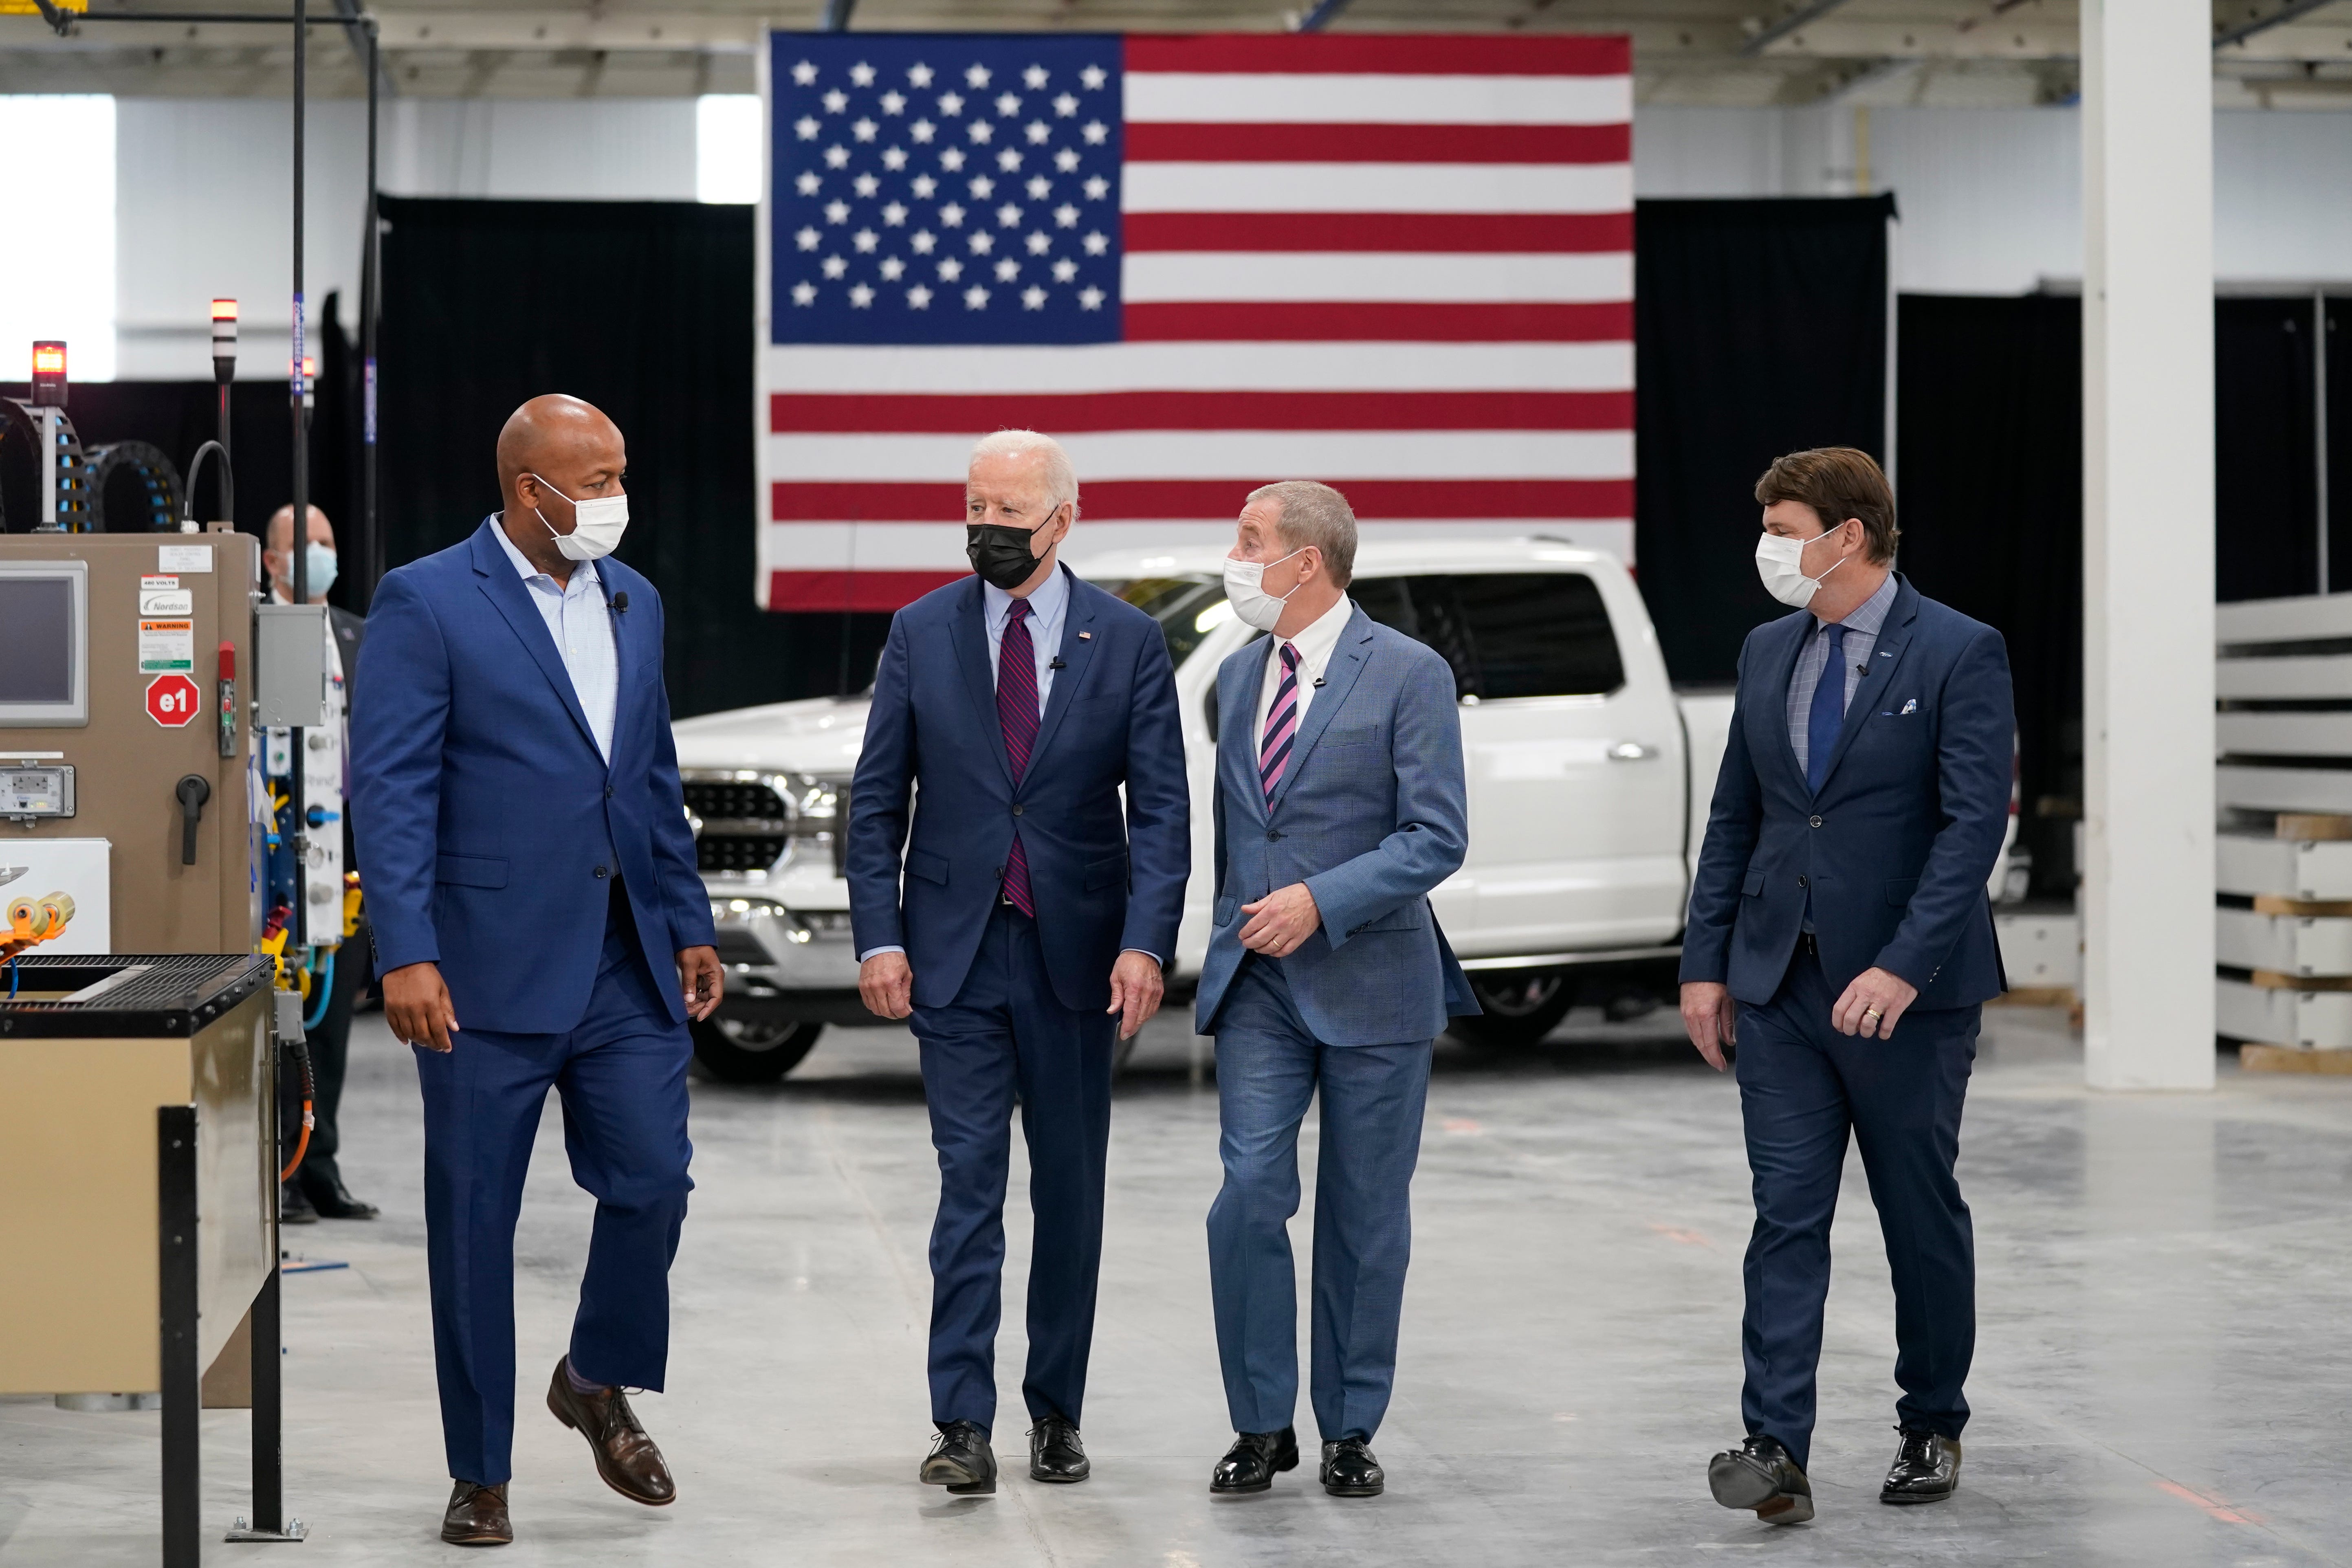 President Joe Biden tours the Ford Rouge EV Center, Tuesday, May 18, 2021, in Dearborn, Mich. From left, Corey Williams, plant manager, Biden, William "Bill" Ford, Jr., Executive Chairman, Ford Motor Company and Jim Farley, CEO, Ford Motor Company.